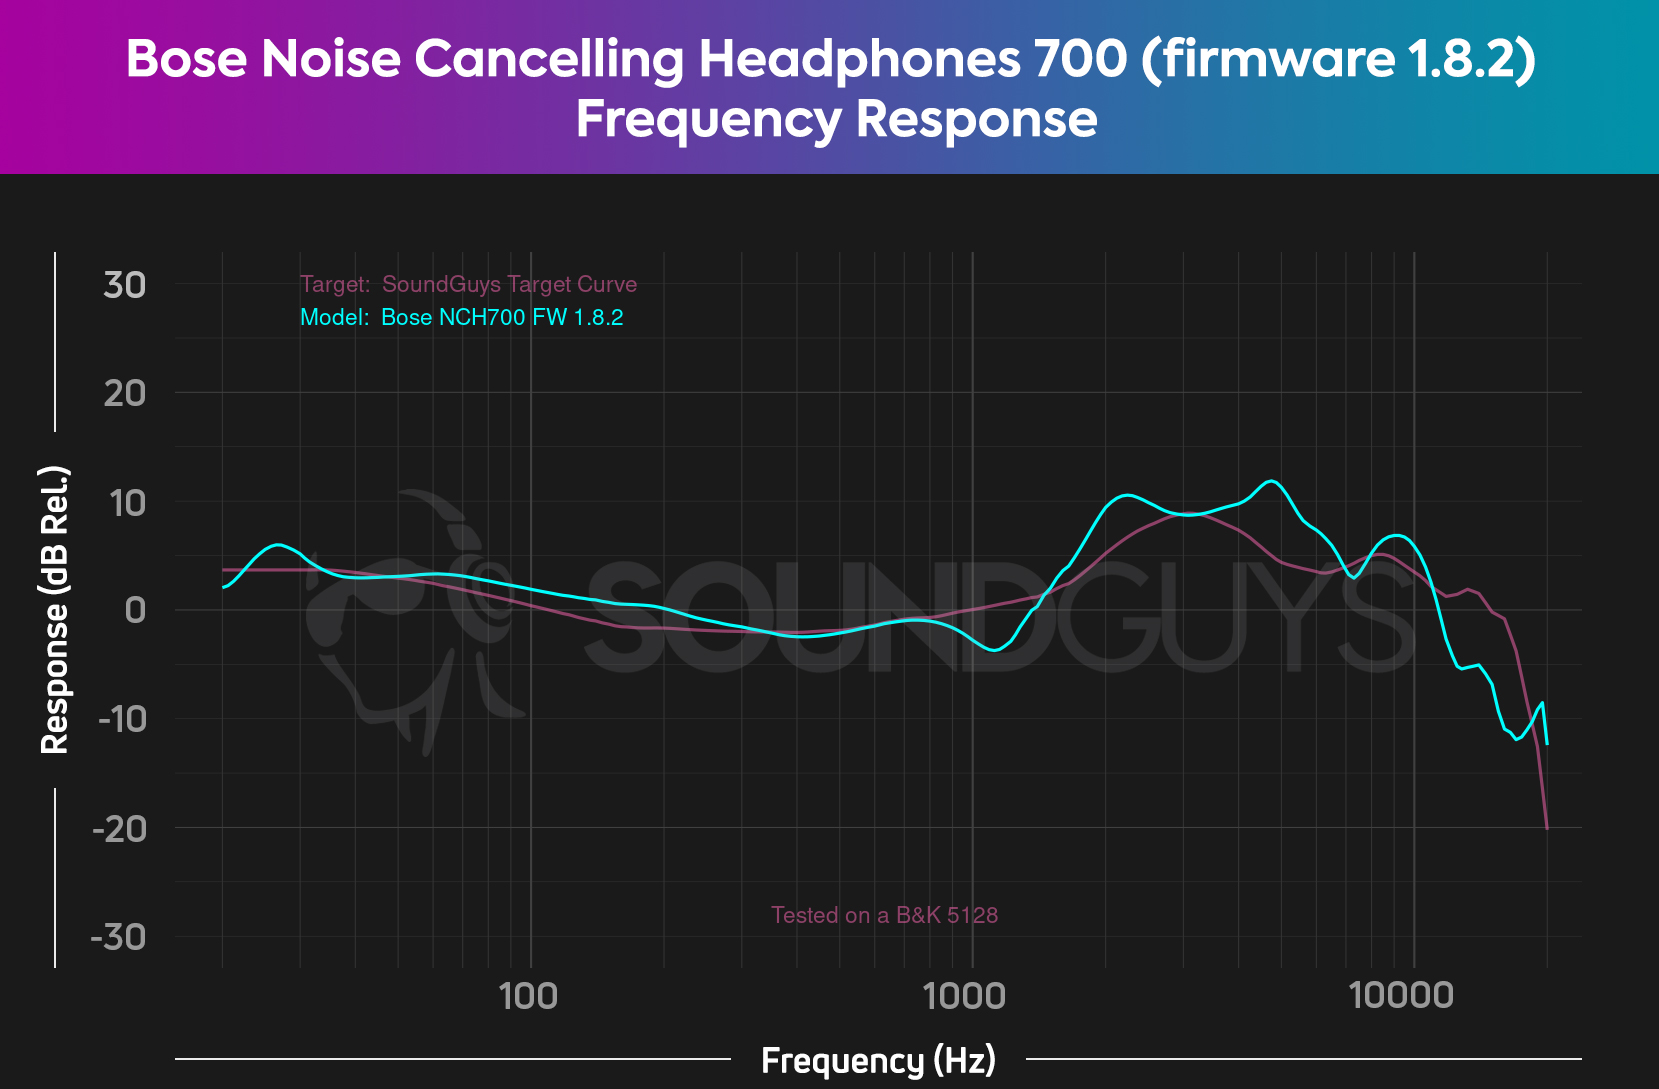 A chart shows the updated frequency response of the Bose Noise Cancelling Headphones 700 with firmware 1.8.2.